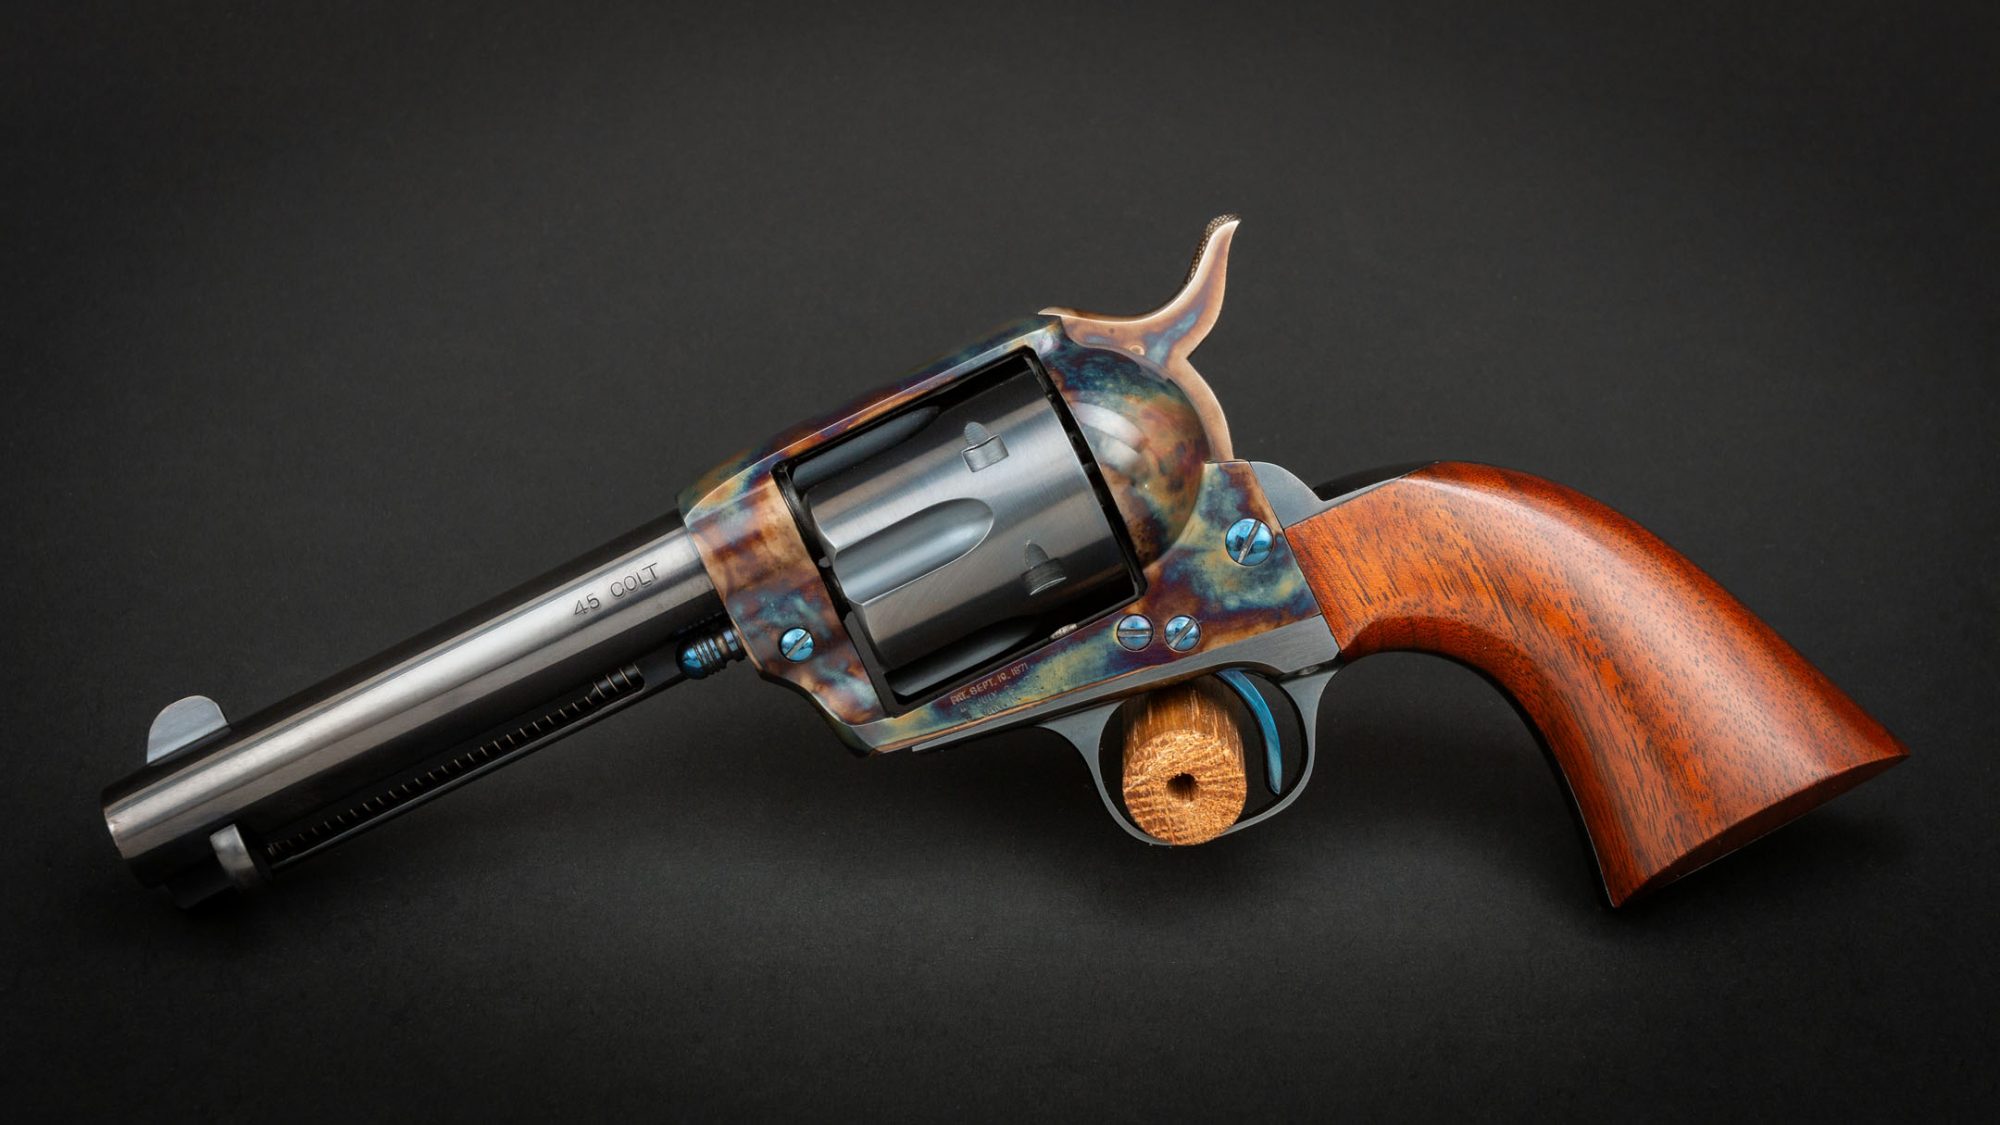 U.S. Fire Arms single action revolver in 45 Colt featuring Turnbull finishes, for sale by Turnbull Restoration of Bloomfield, NY